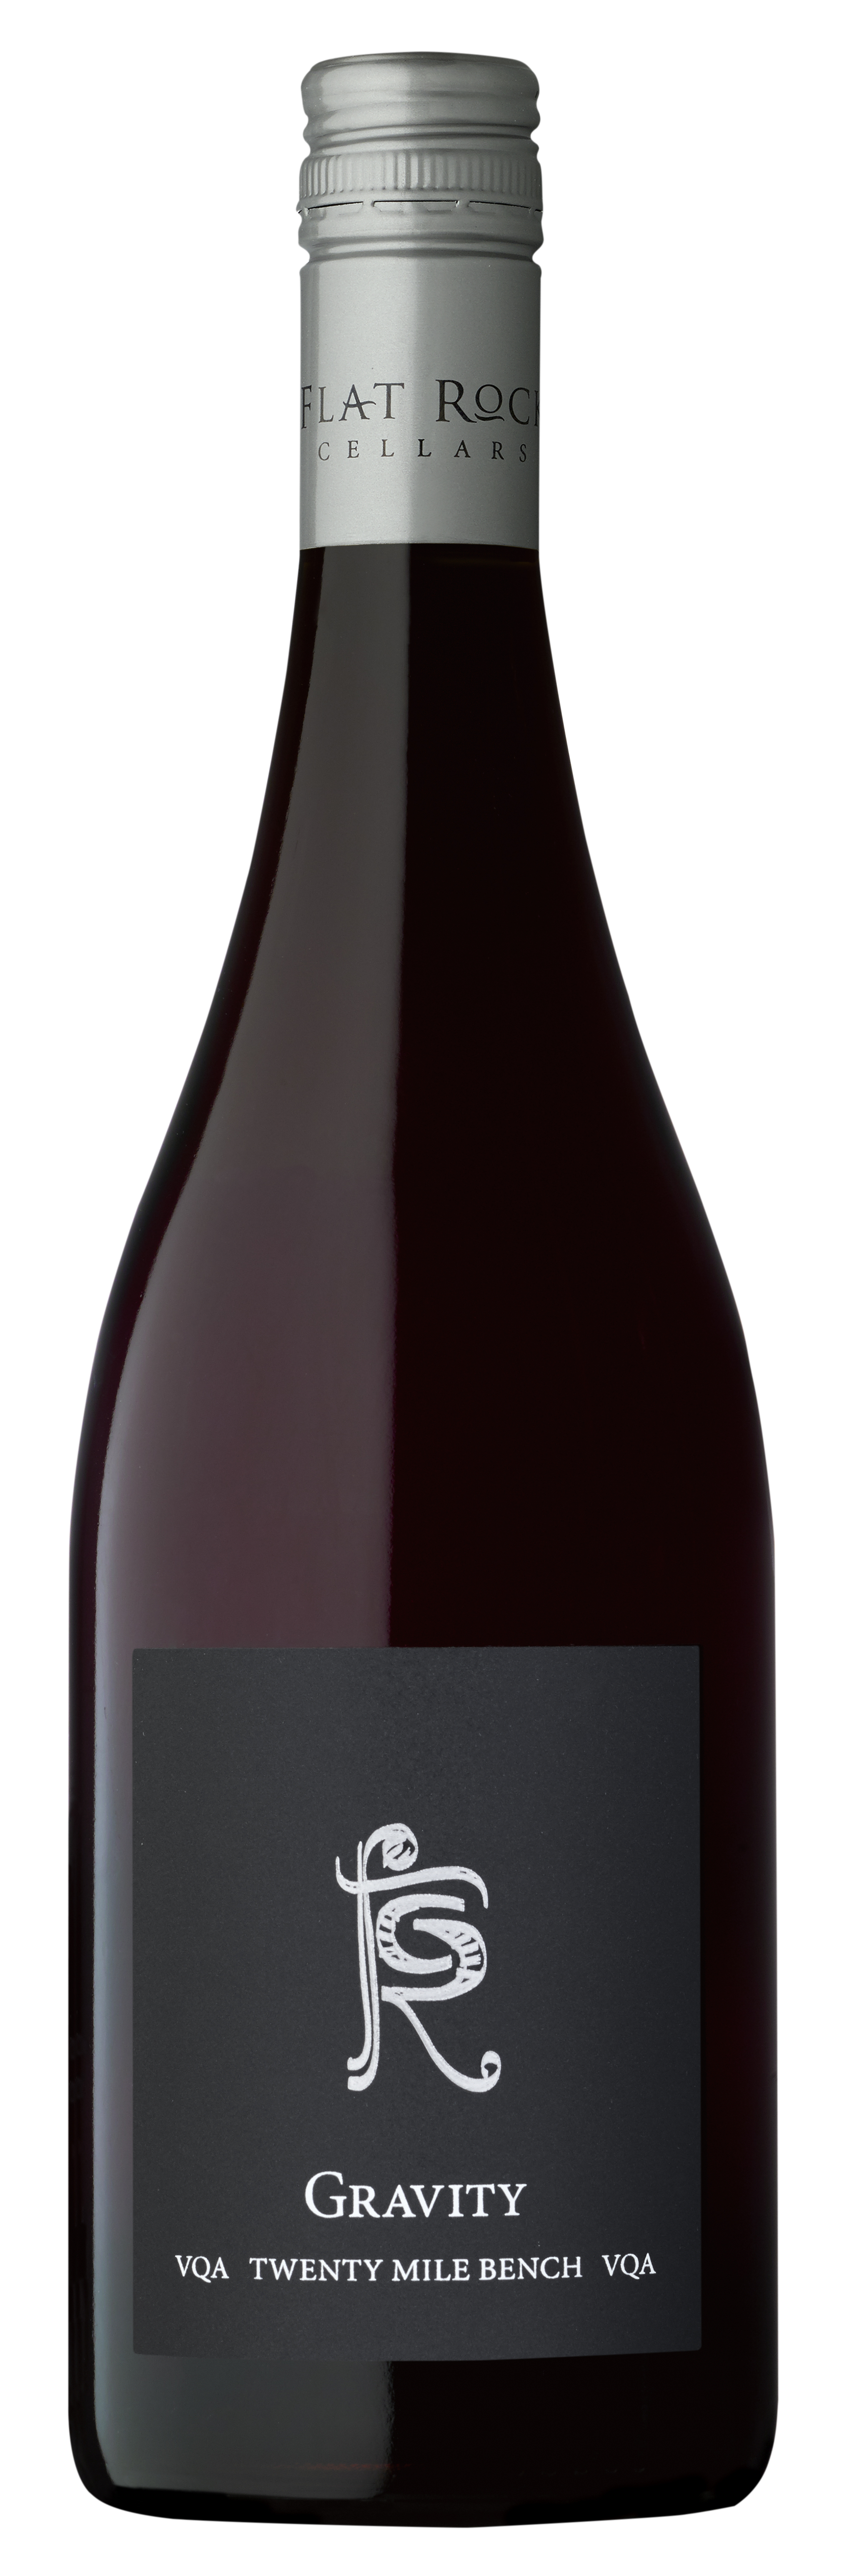 Product Image for SOLD OUT - 2019 Gravity Pinot Noir